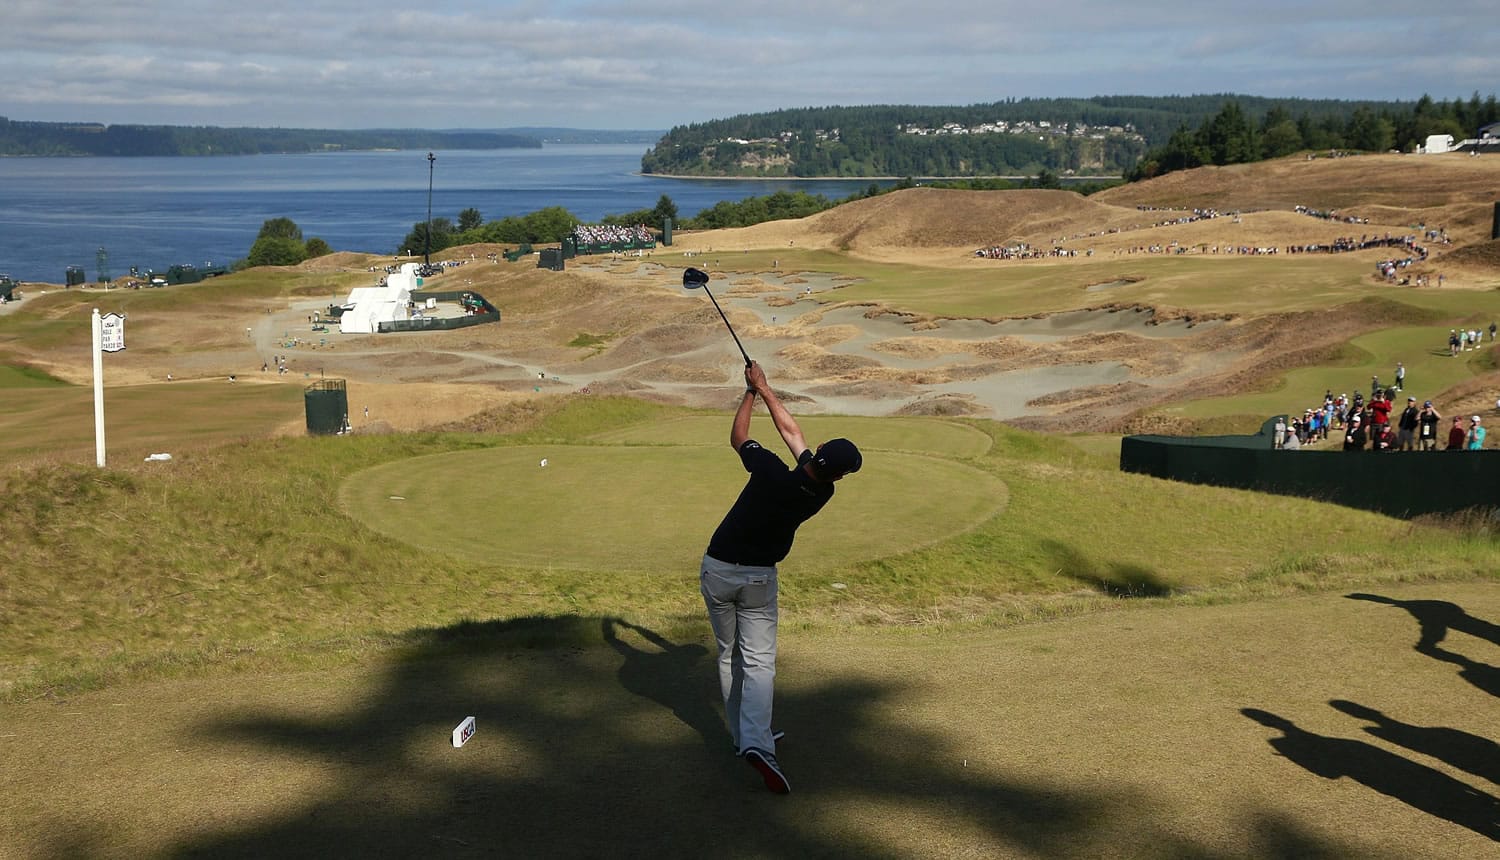 Justin Rose, of England, watches his tee shot on the 14th hole during a practice round for the U.S. Open golf tournament at Chambers Bay on Wednesday, June 17, 2015 in University Place.